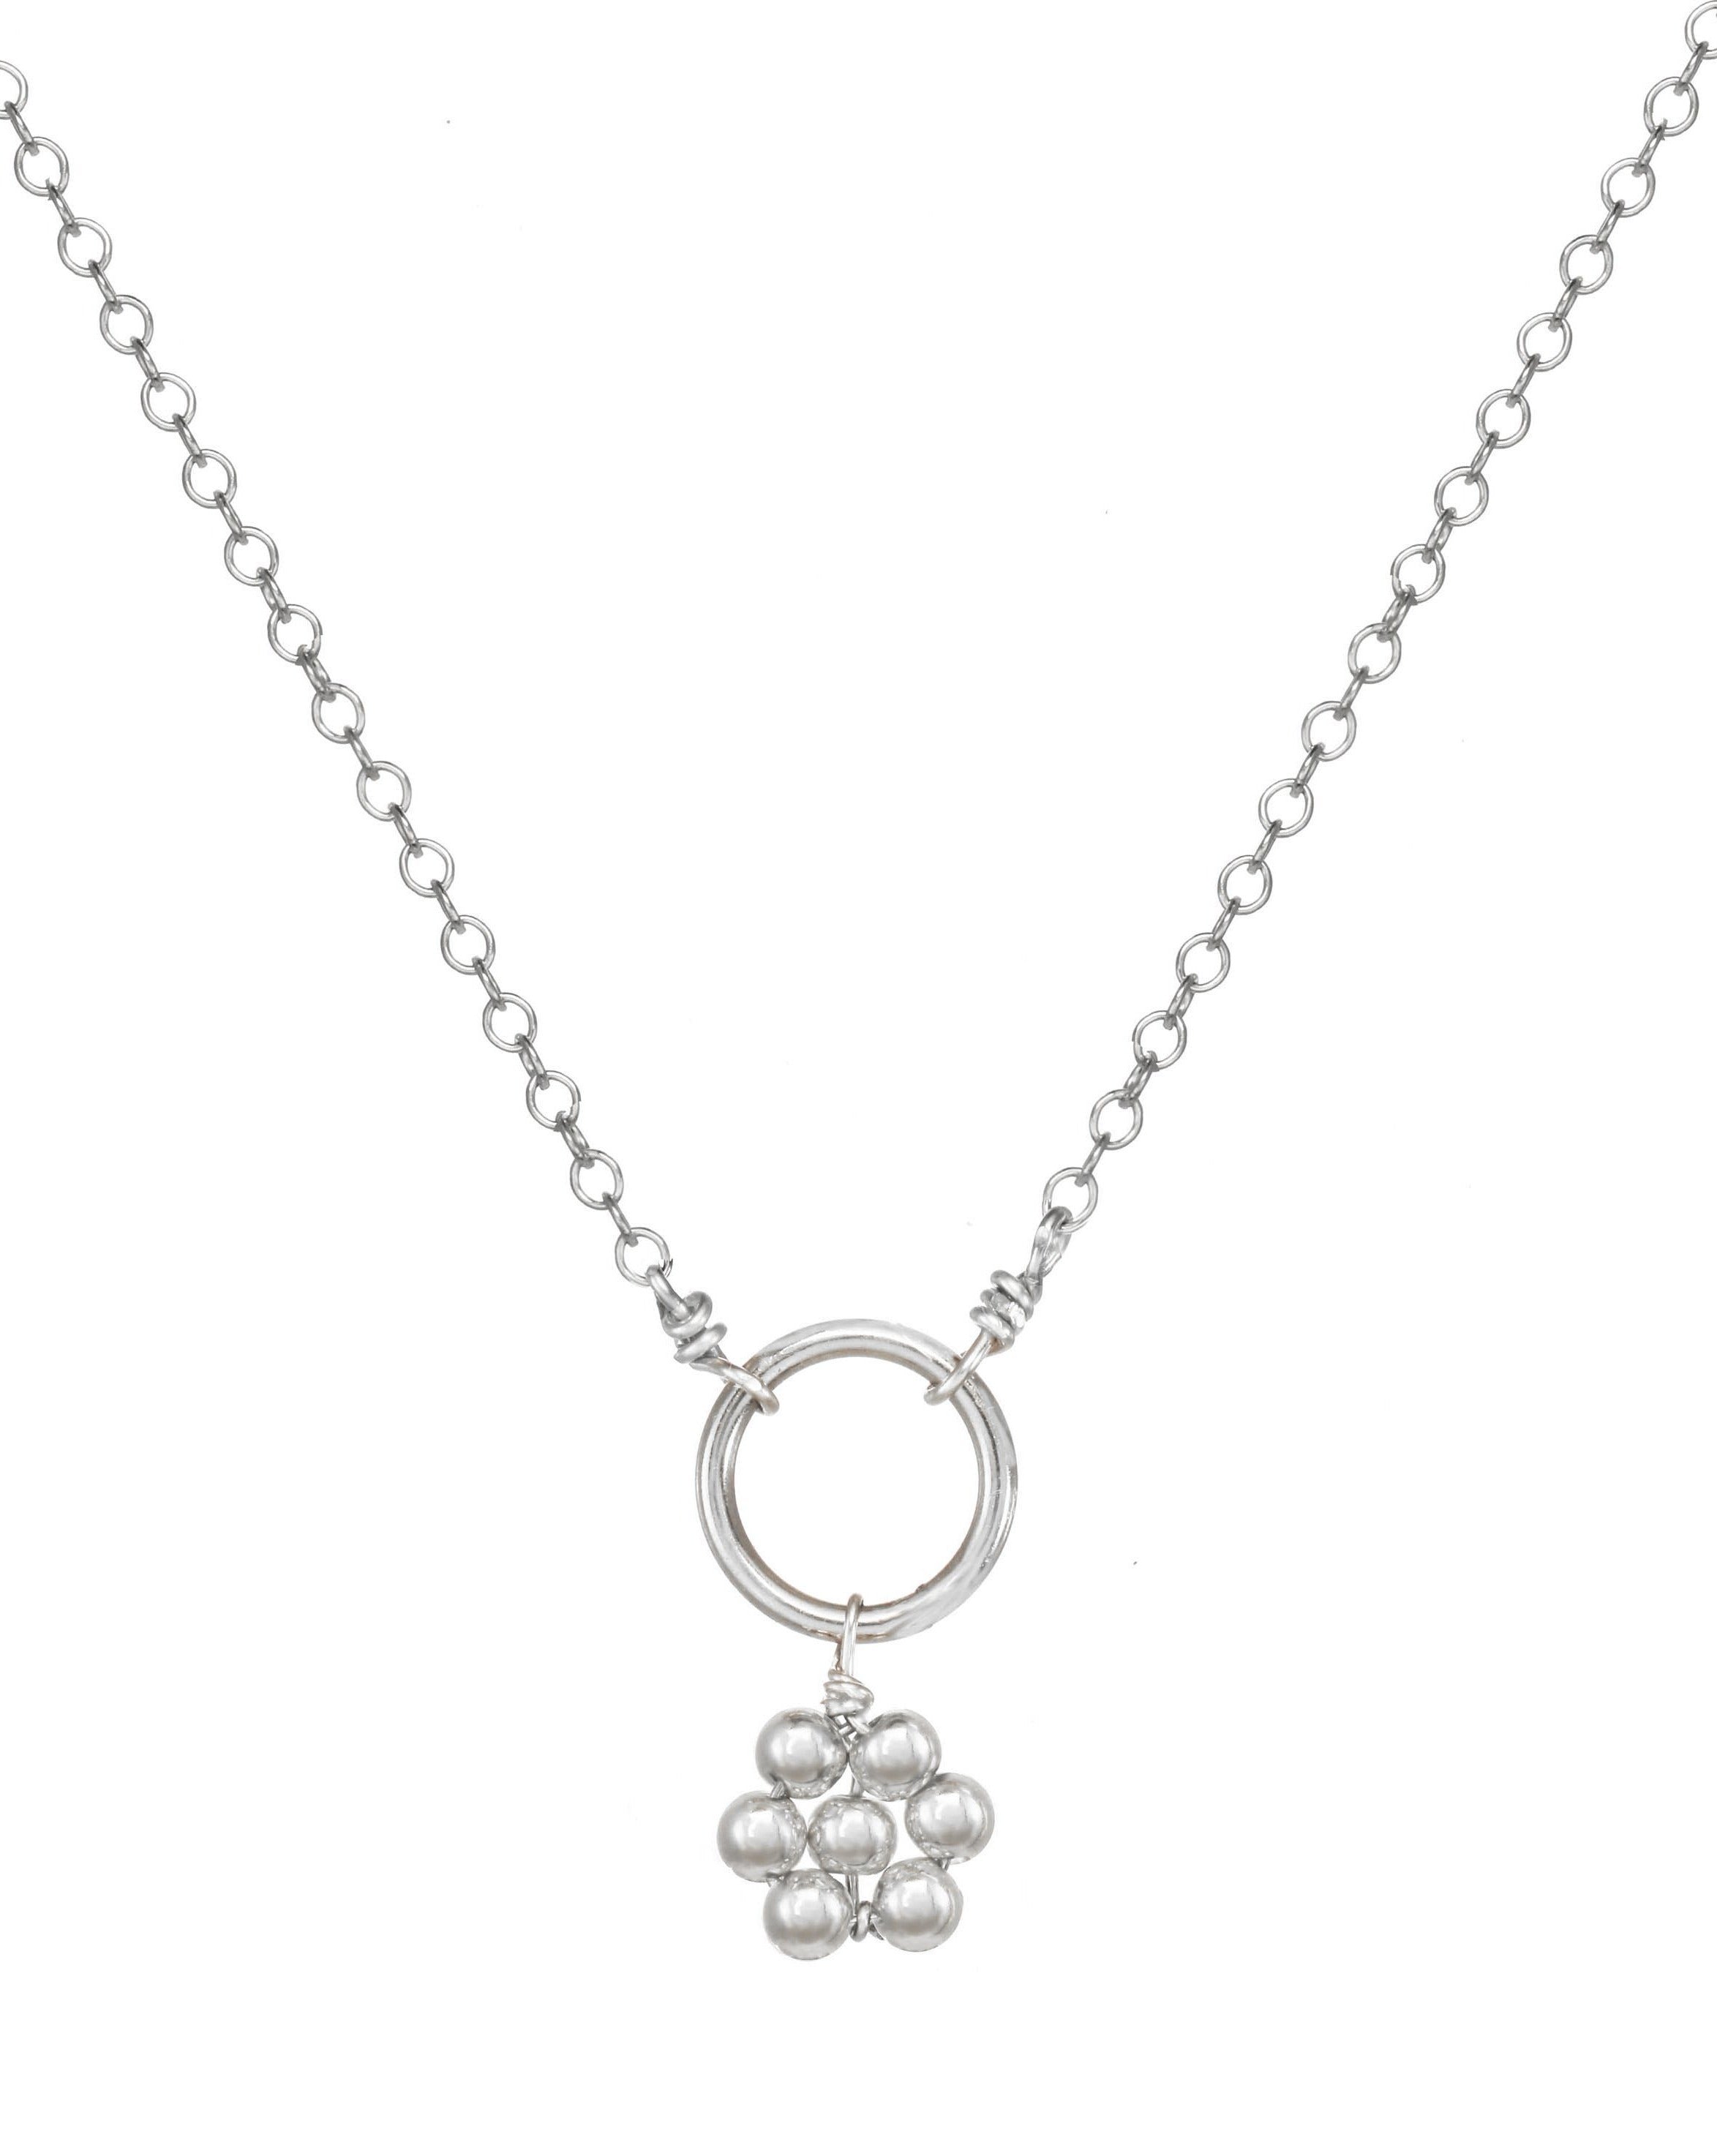 Luella Necklace by KOZAKH. A 16 to 18 inch adjustable length necklace, crafted in Sterling Silver, featuring a handmade beaded daisy charm.